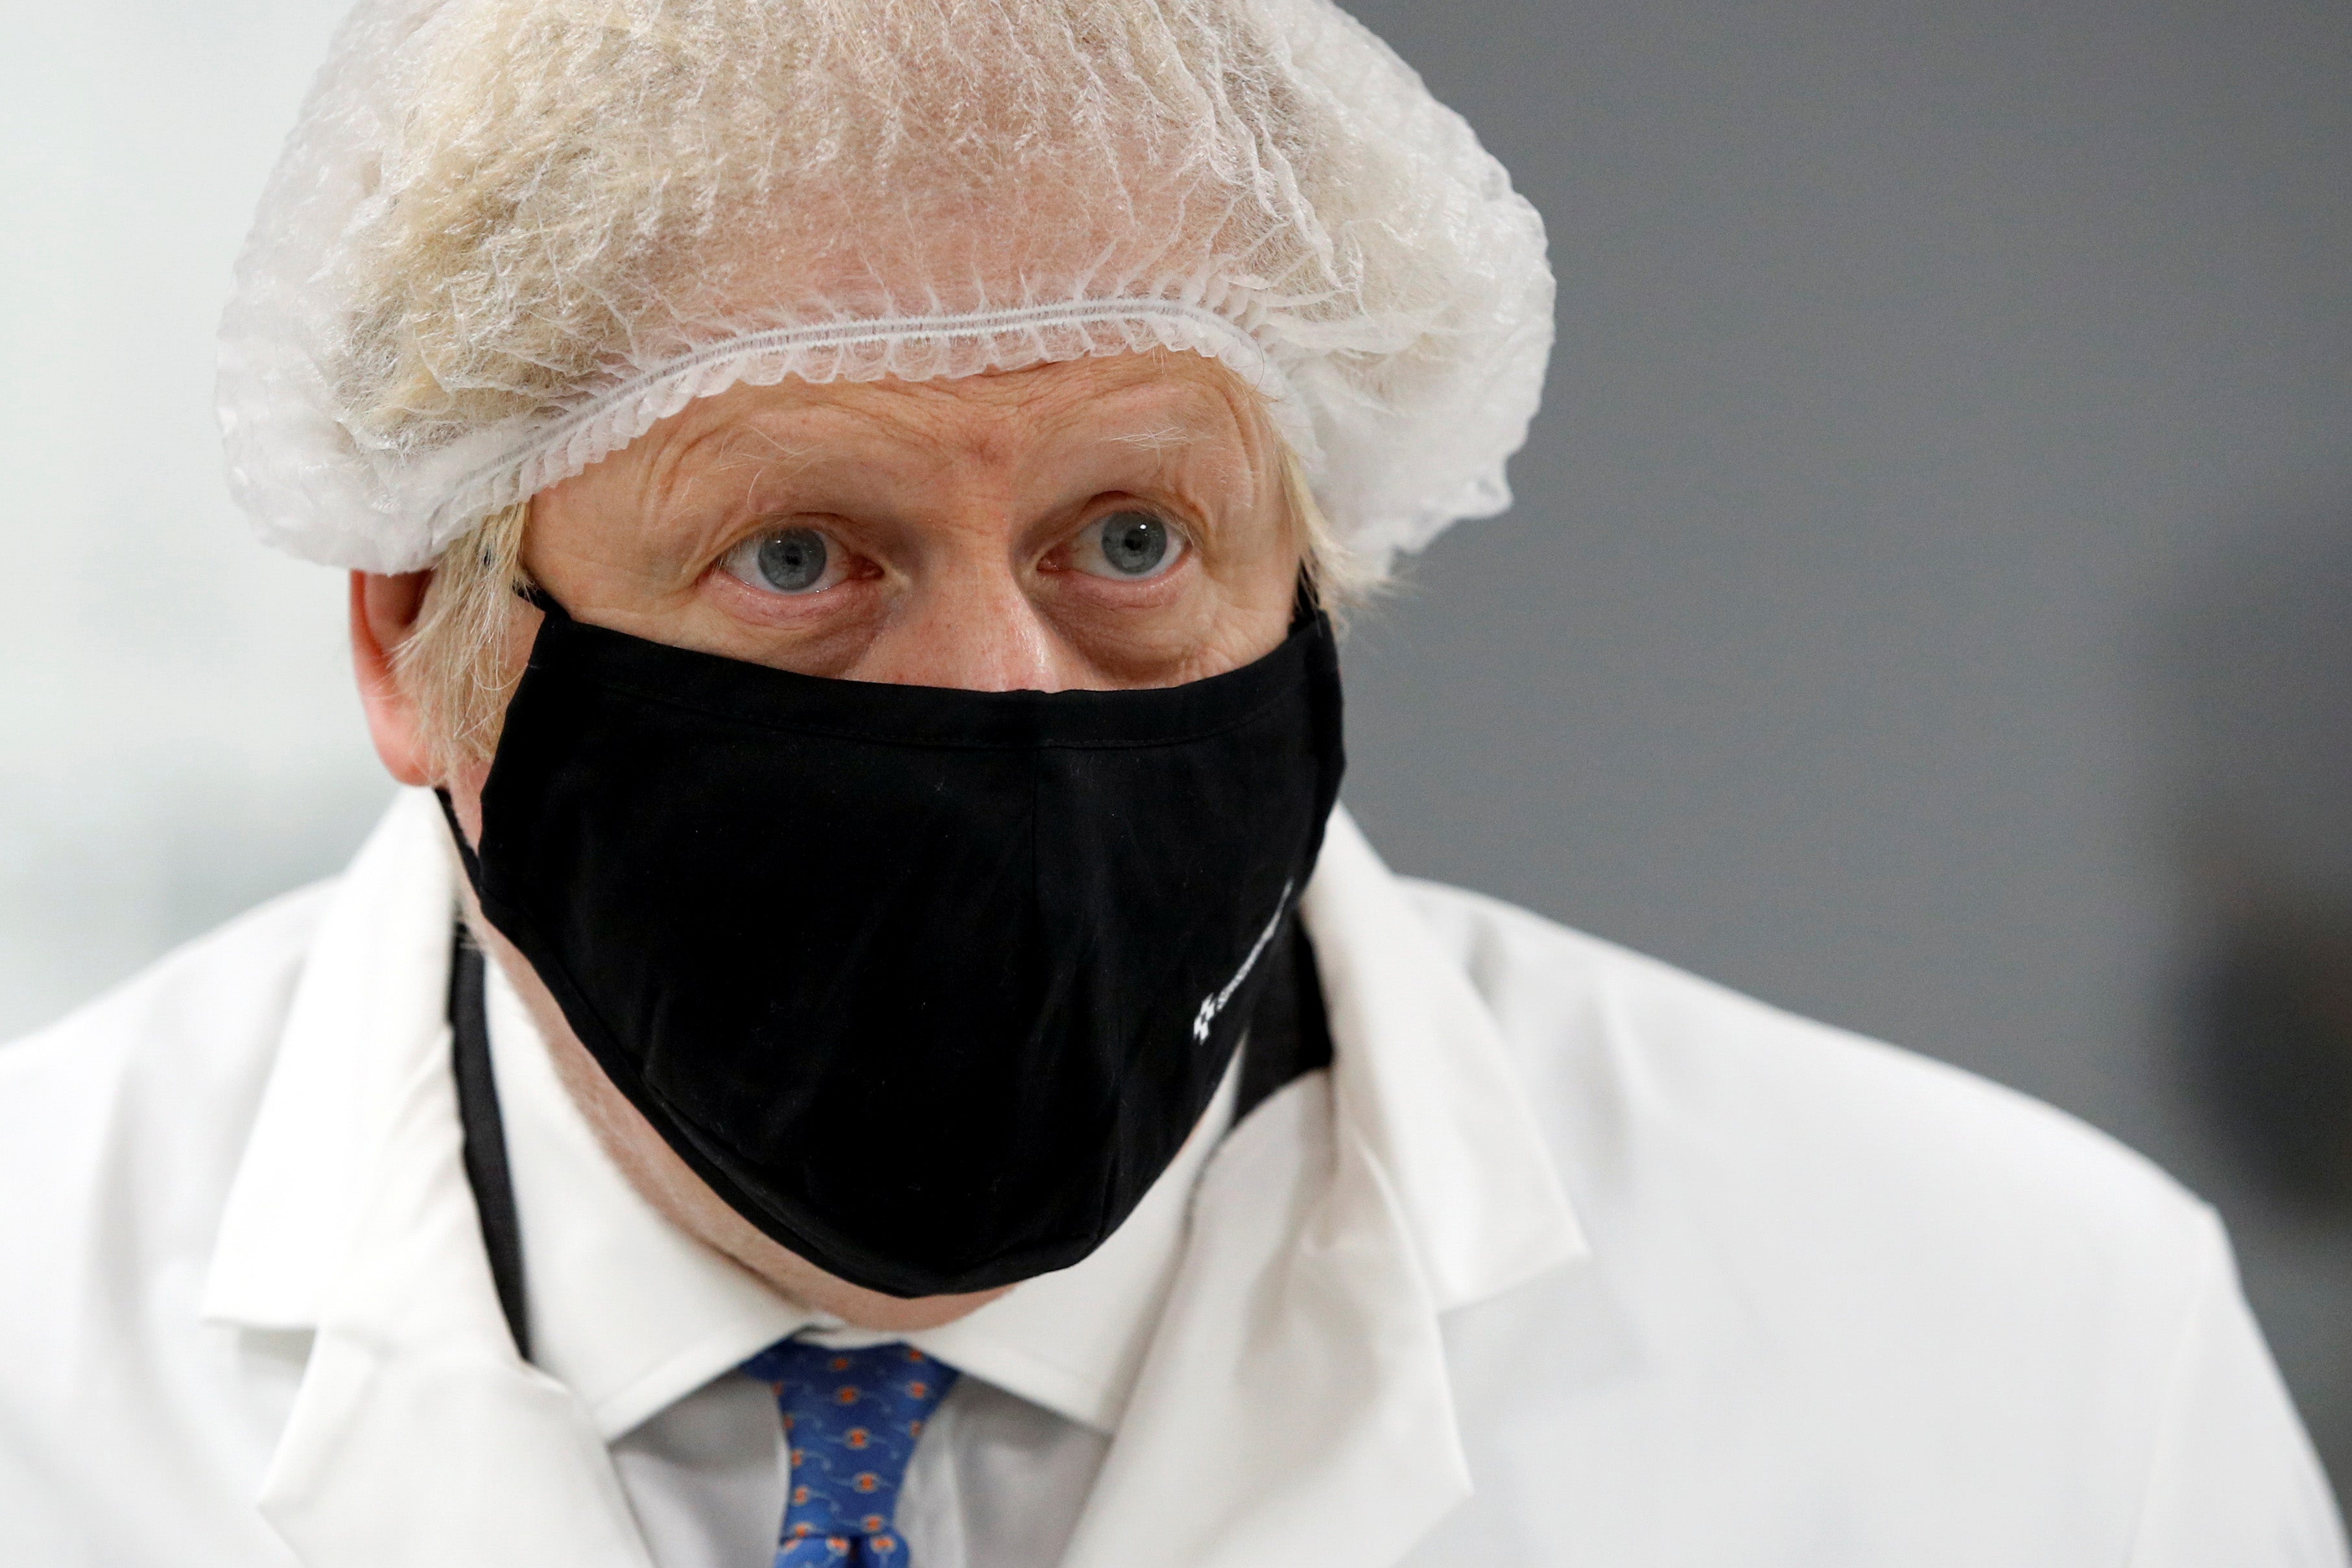 Boris Johnson during a visit to SureScreen Diagnostics on February 7, 2021 in Derby, England